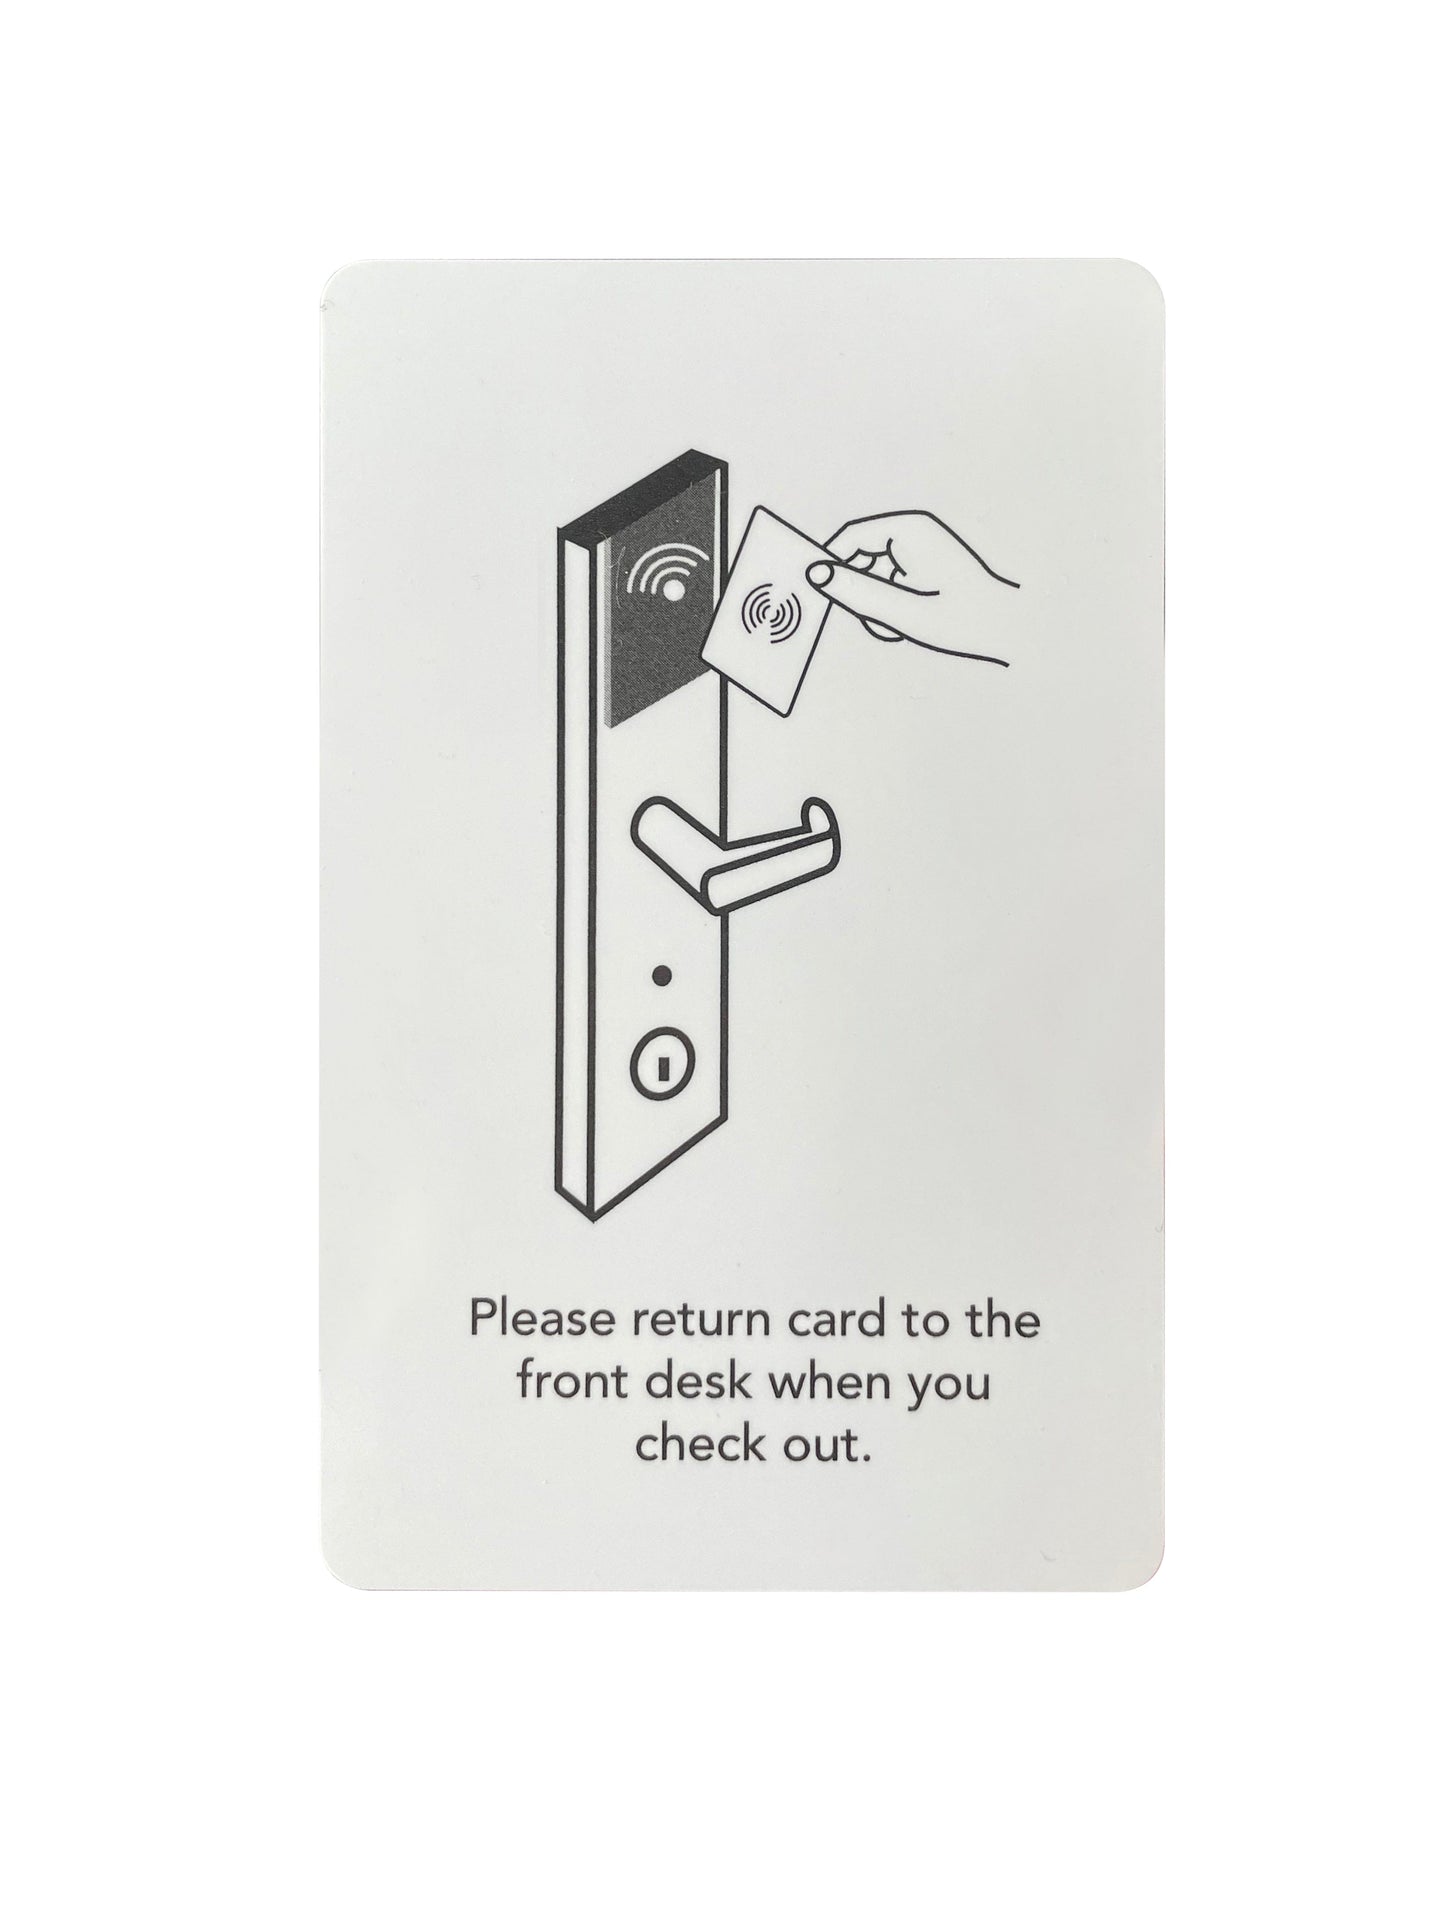 Choice Privileges ULEV1 48 byte RFID Key Cards Compatible with Assa Abloy* Guest Lock Systems-See Description (Sold in boxes of 200)